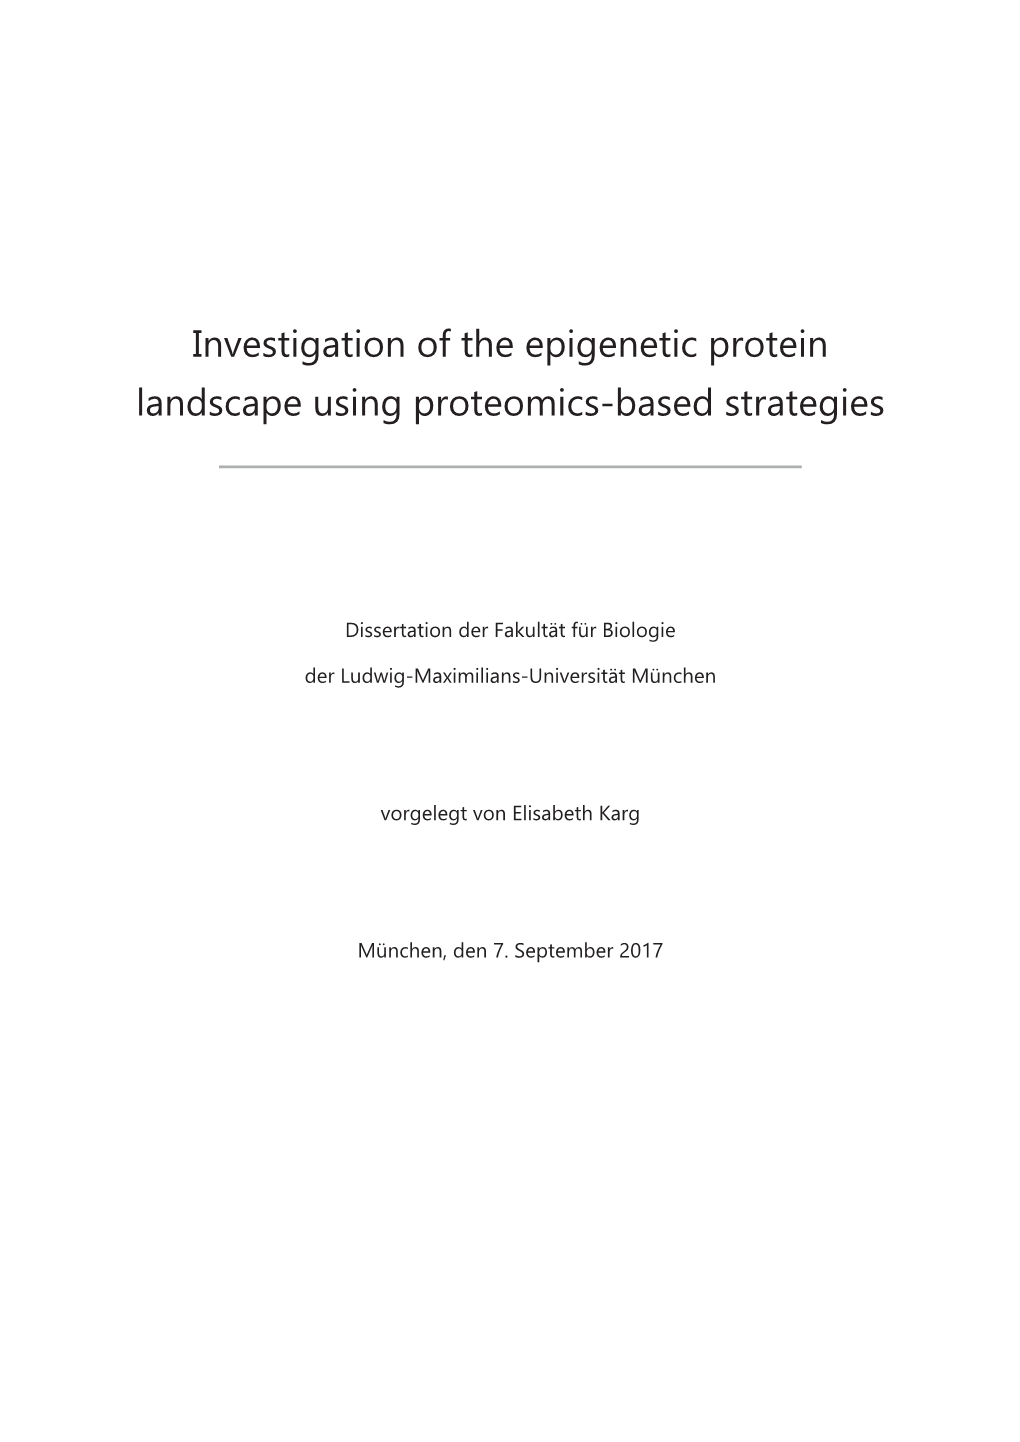 Investigation of the Epigenetic Protein Landscape Using Proteomics-Based Strategies